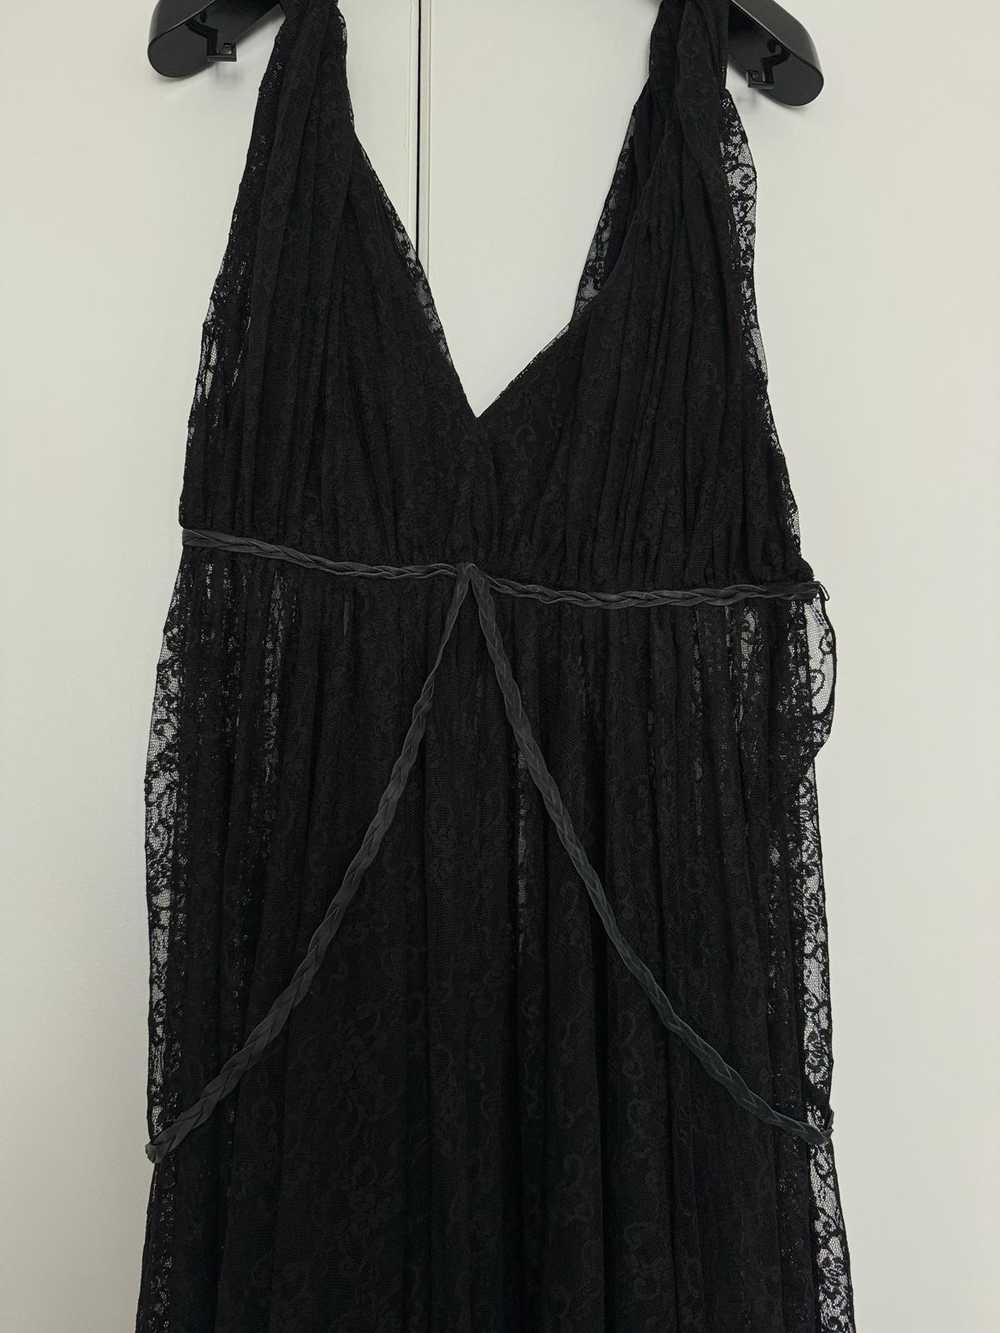 Product Details Black Sheer Lace Plunge Gown - image 4